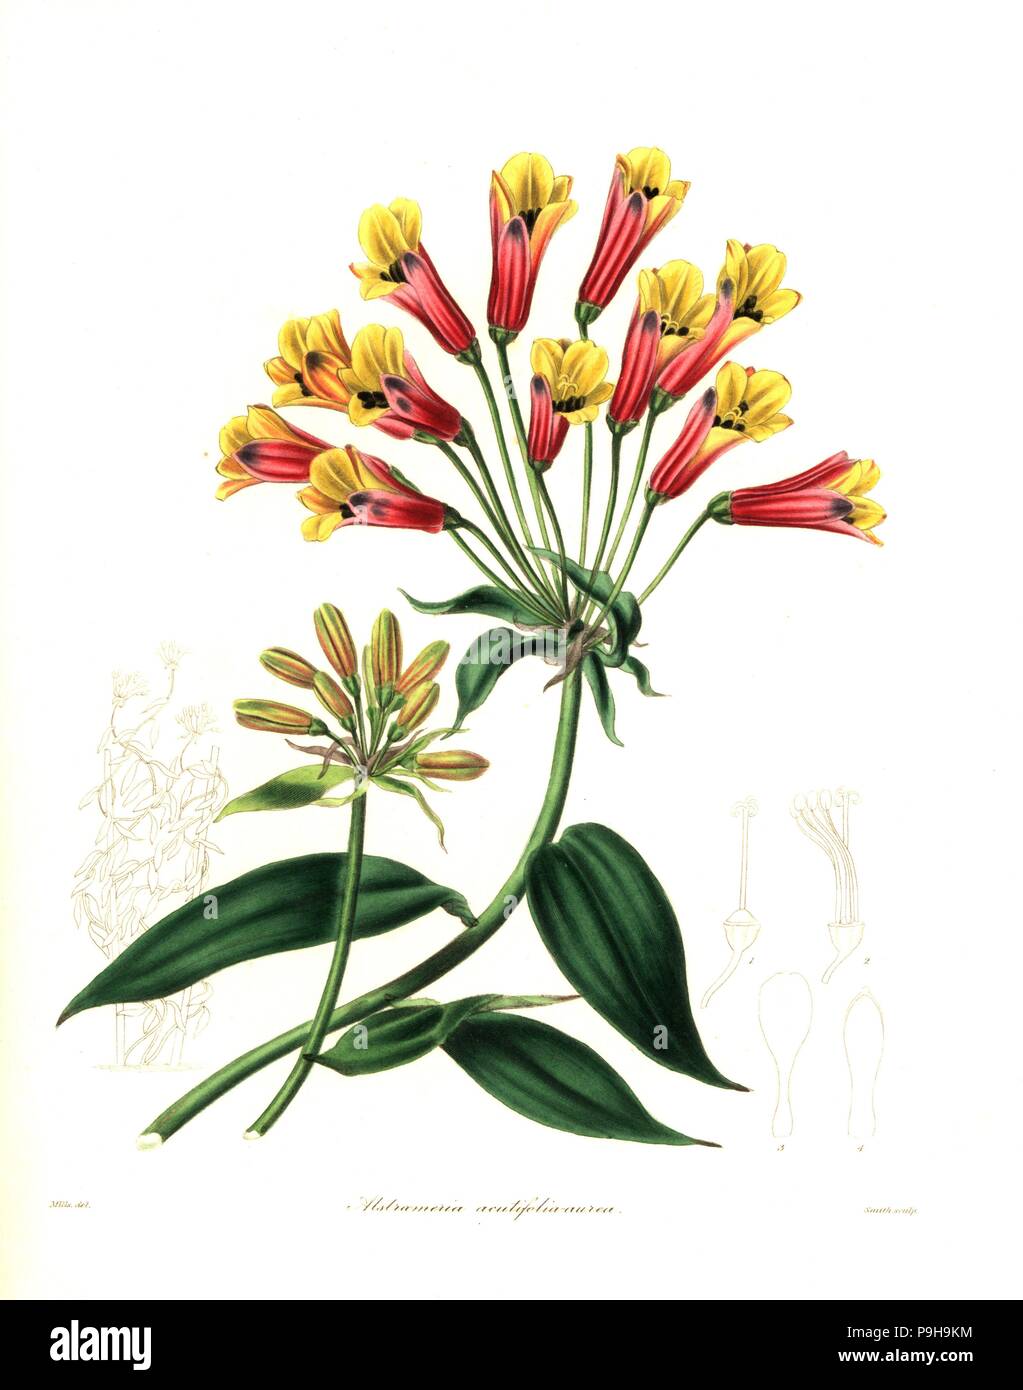 Hybrid alstroemeria, Bomarea acutifolia x Alstroemeria aurea (Alstroemeria acutifolia-aurea). Handcoloured copperplate engraving by Smith after a botanical illustration by MIlls from Benjamin Maund and the Rev. John Stevens Henslow's The Botanist, London, 1836. Stock Photo